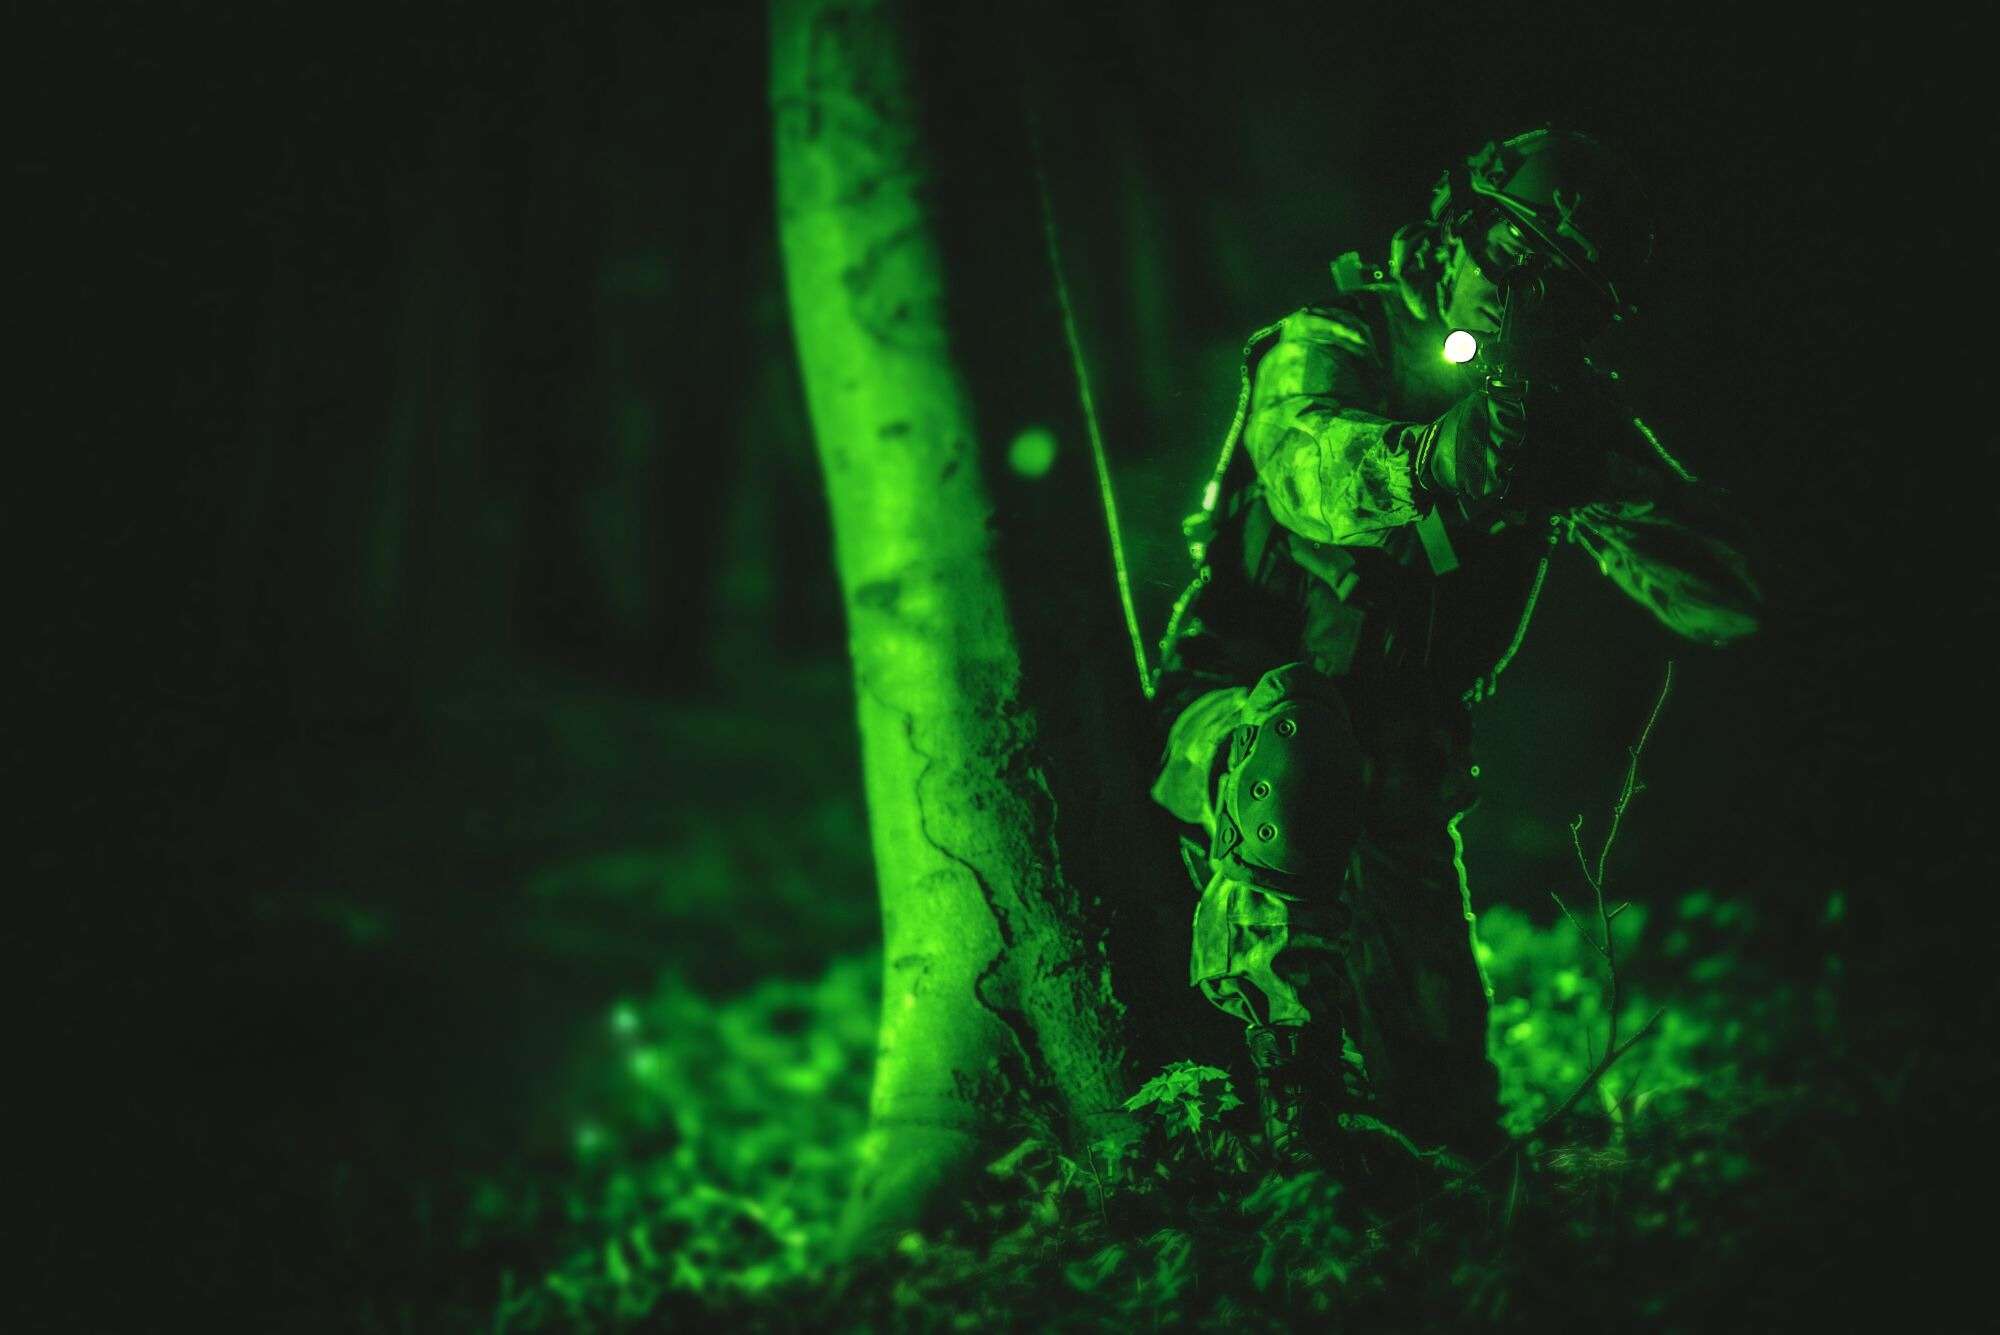 night vision soldier crouched behind tree